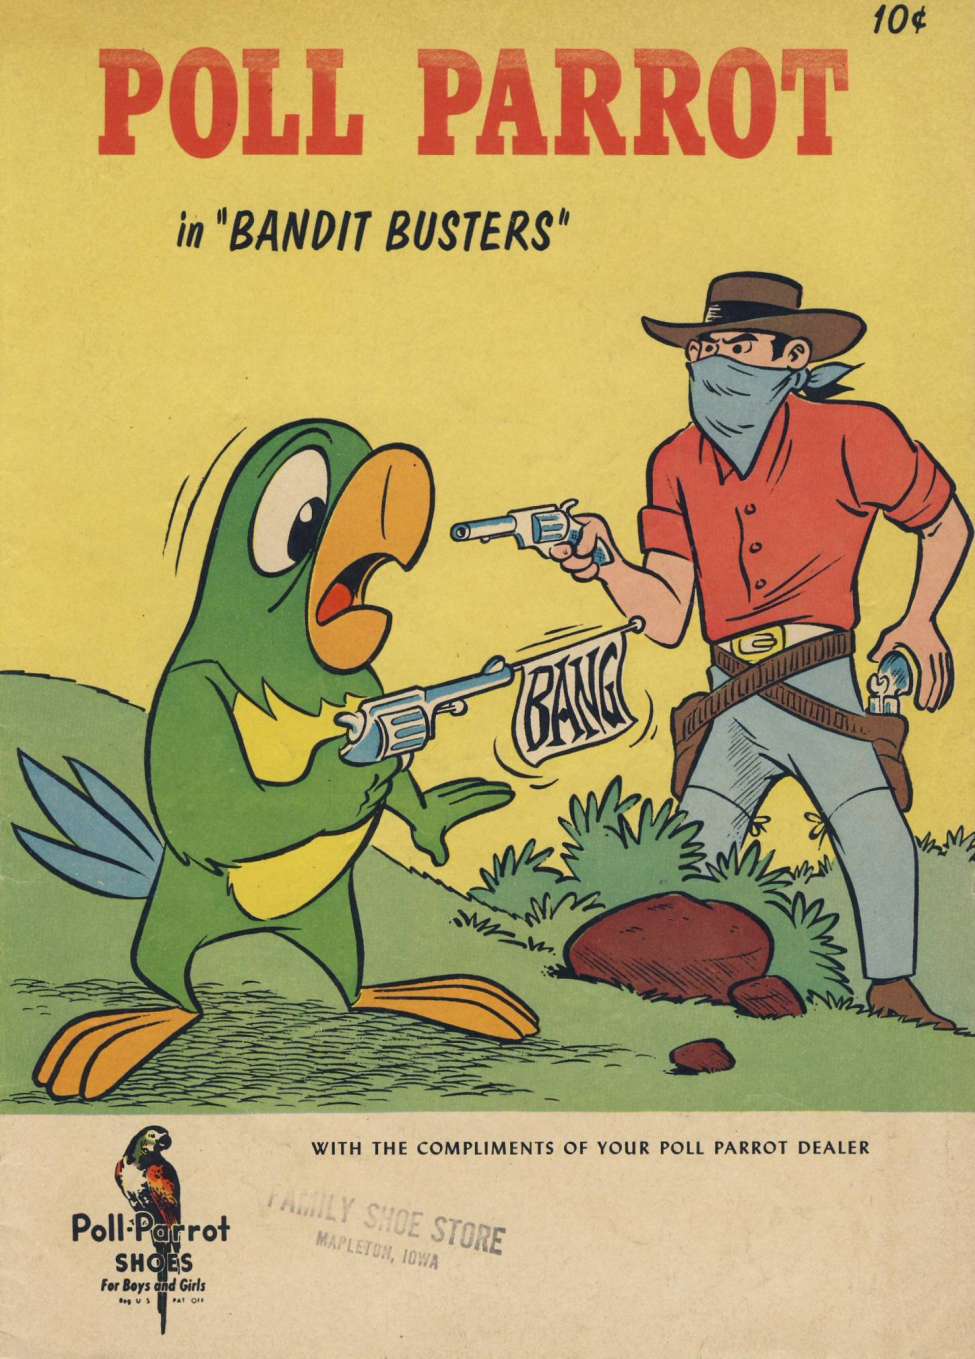 Book Cover For Poll Parrot 5 - Bandit Busters